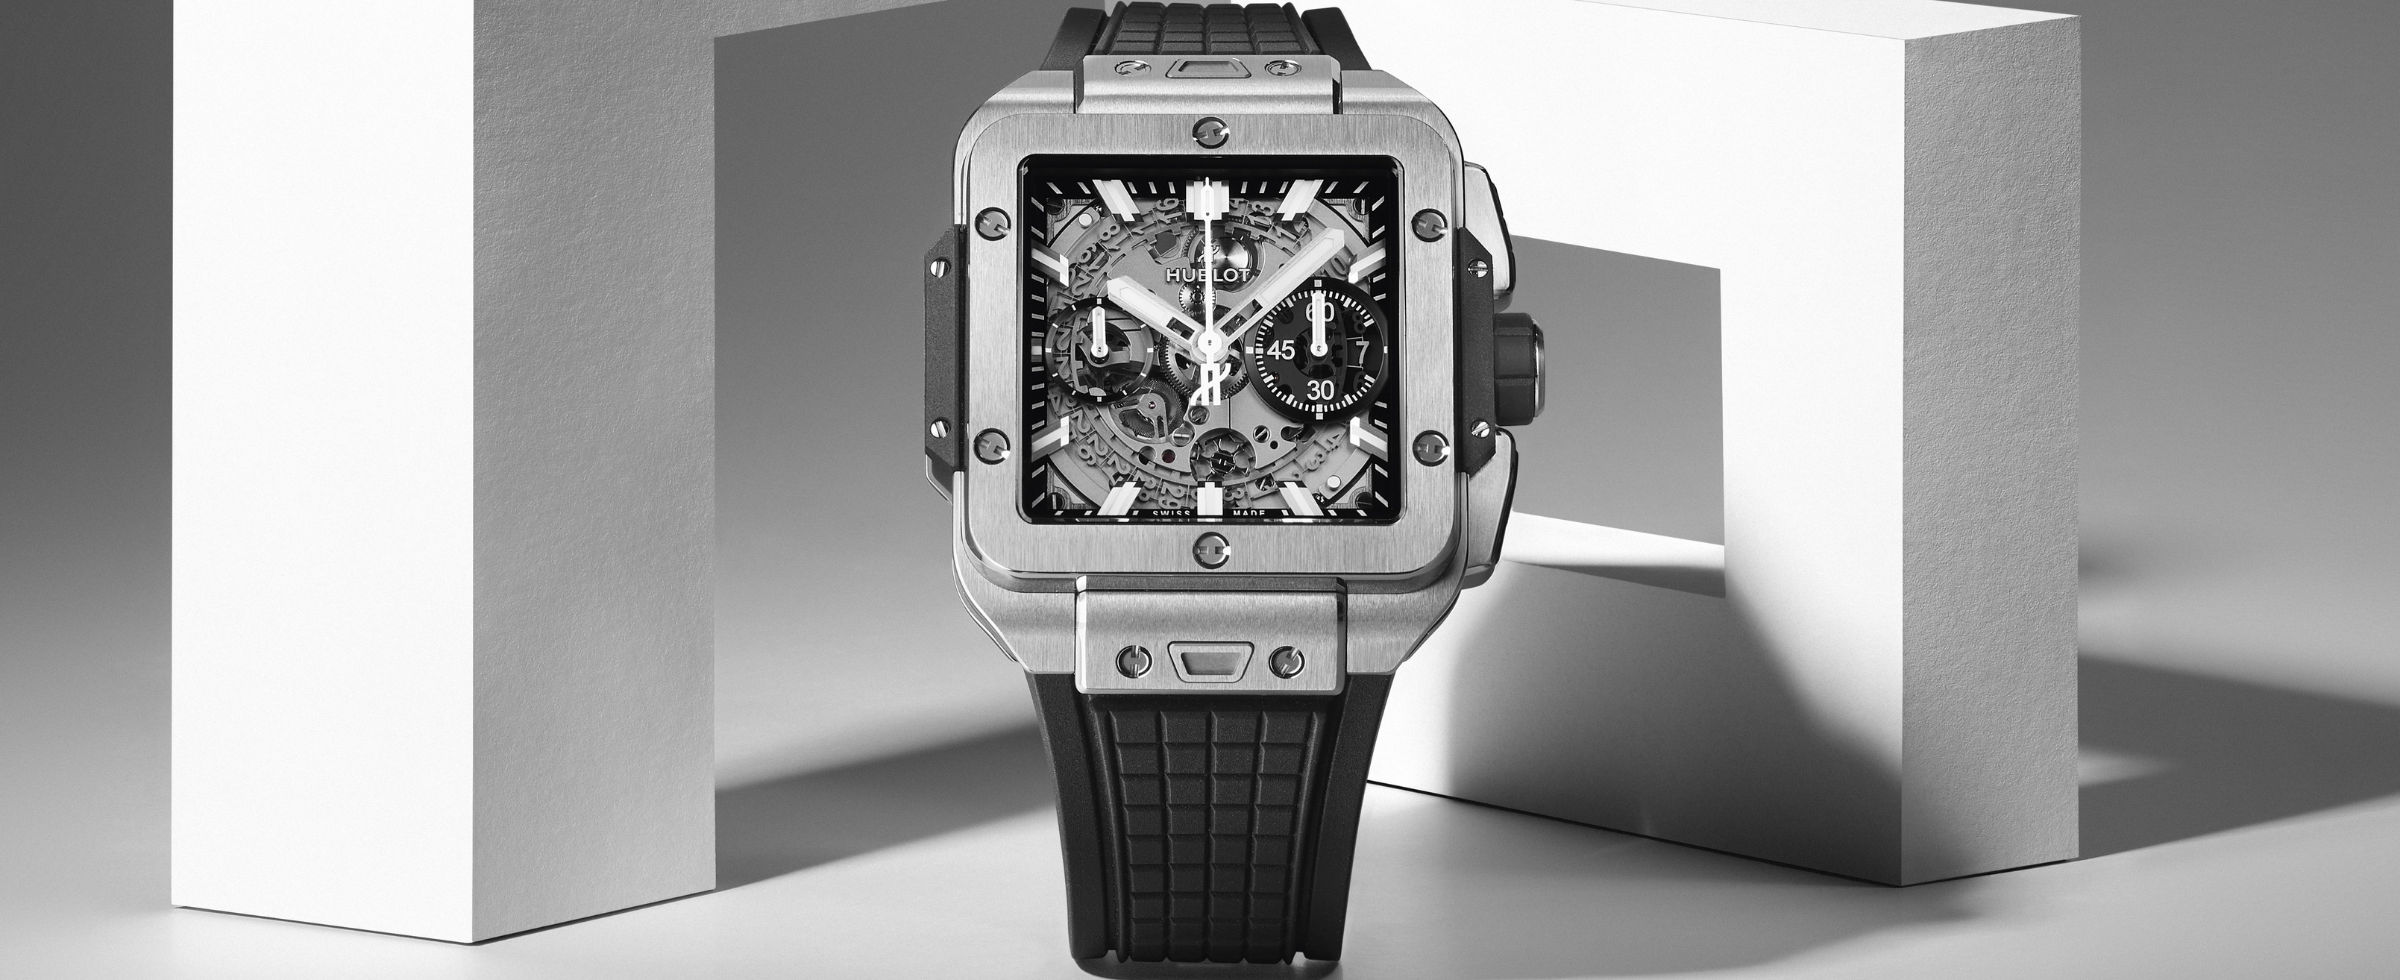 Watches and Wonders 2022: Hublot unveils its first square watch